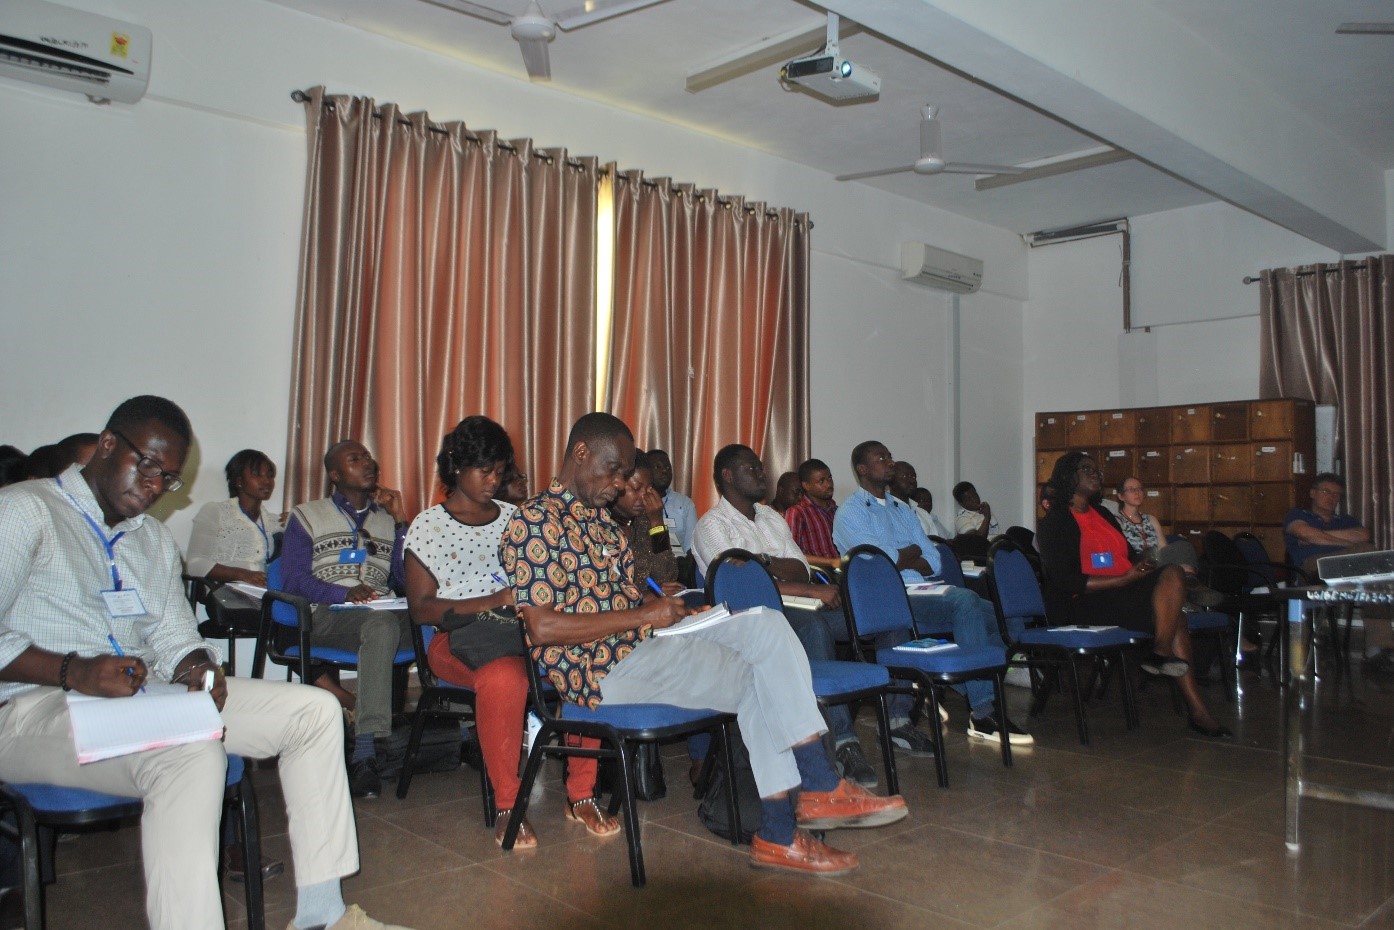 Participants seated at the workshop.